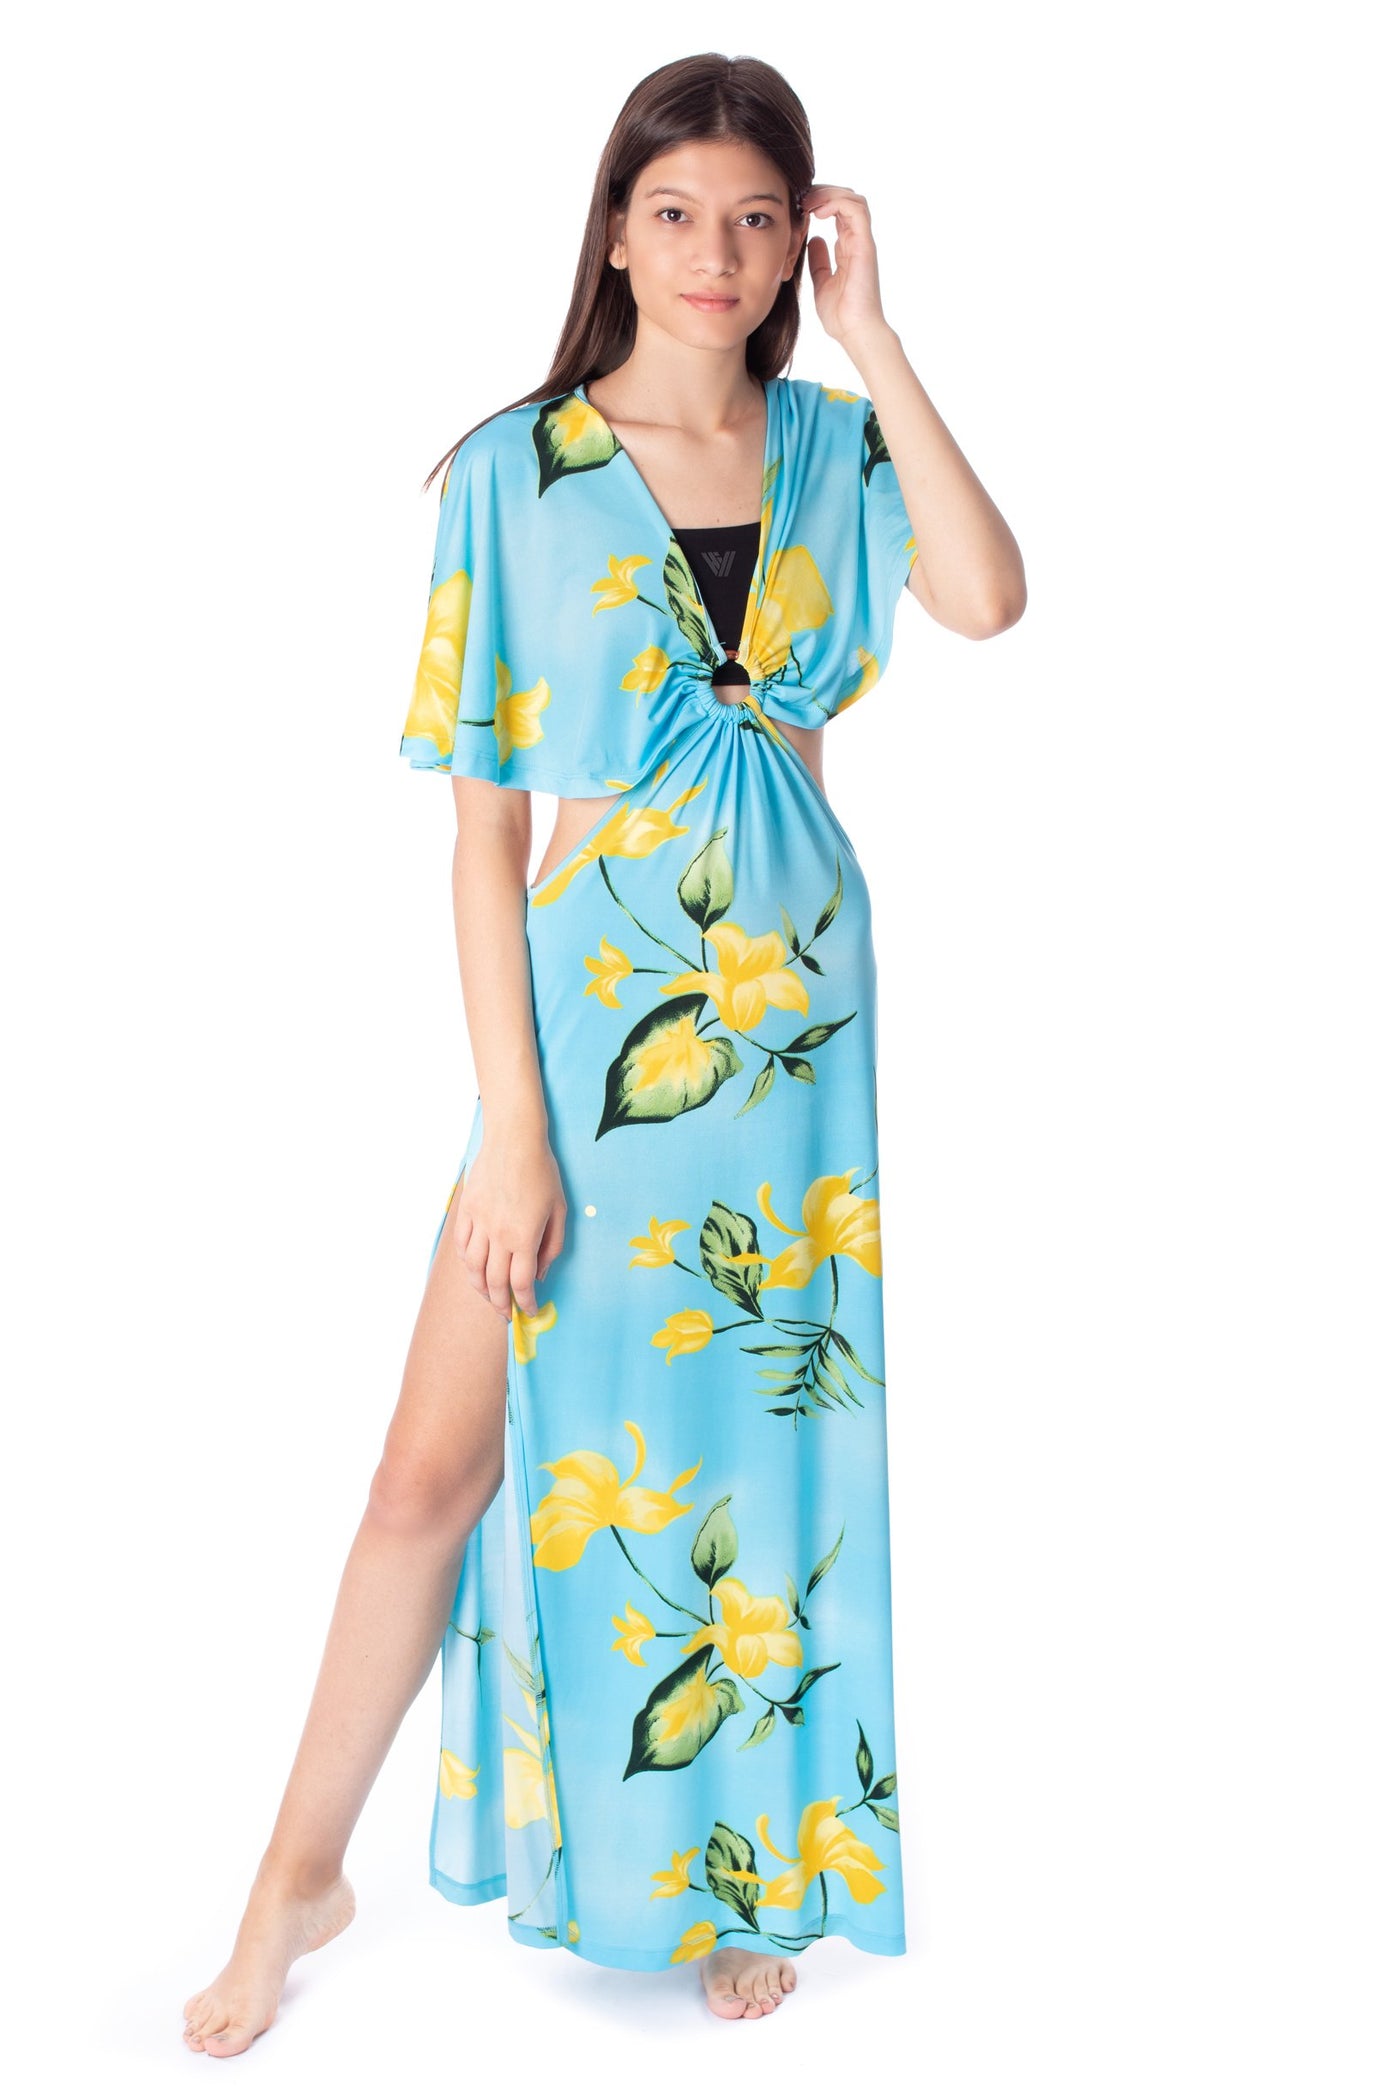 chassca printed beach maxi dress with ring detail - Breakmood